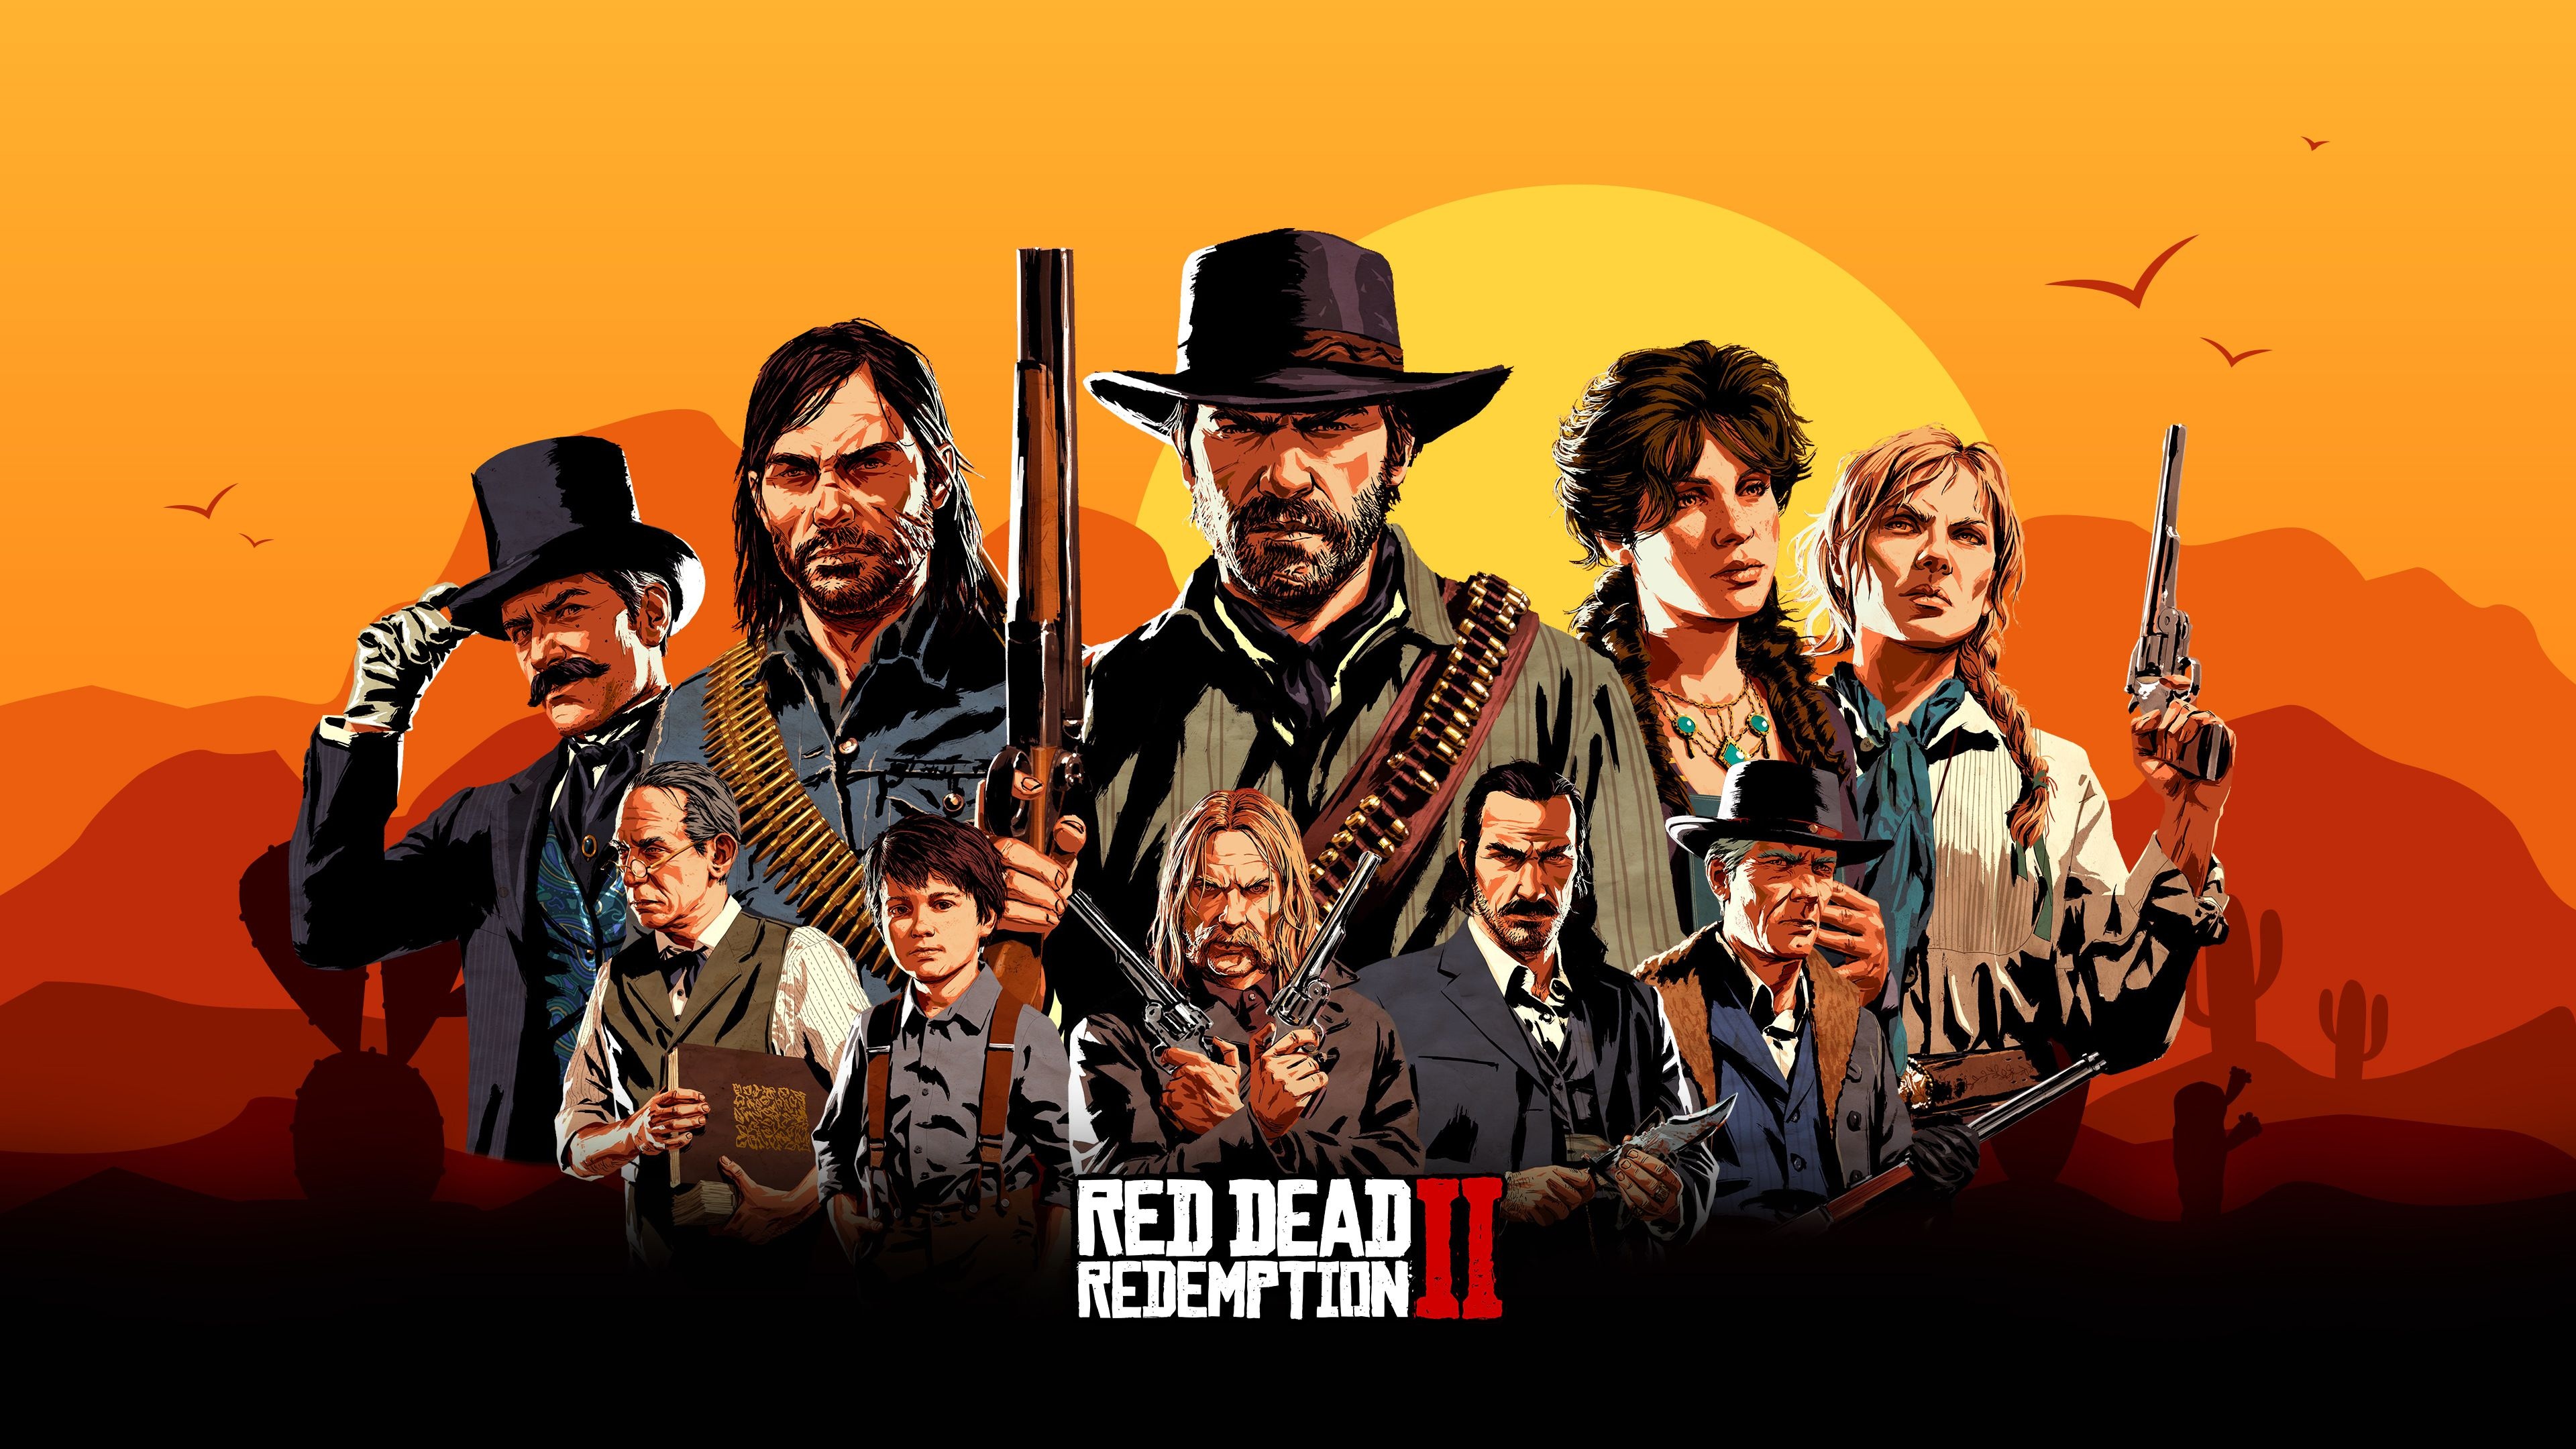 John Marston, Red Dead Redemption 2, Game characters, PS games, 3840x2160 4K Desktop